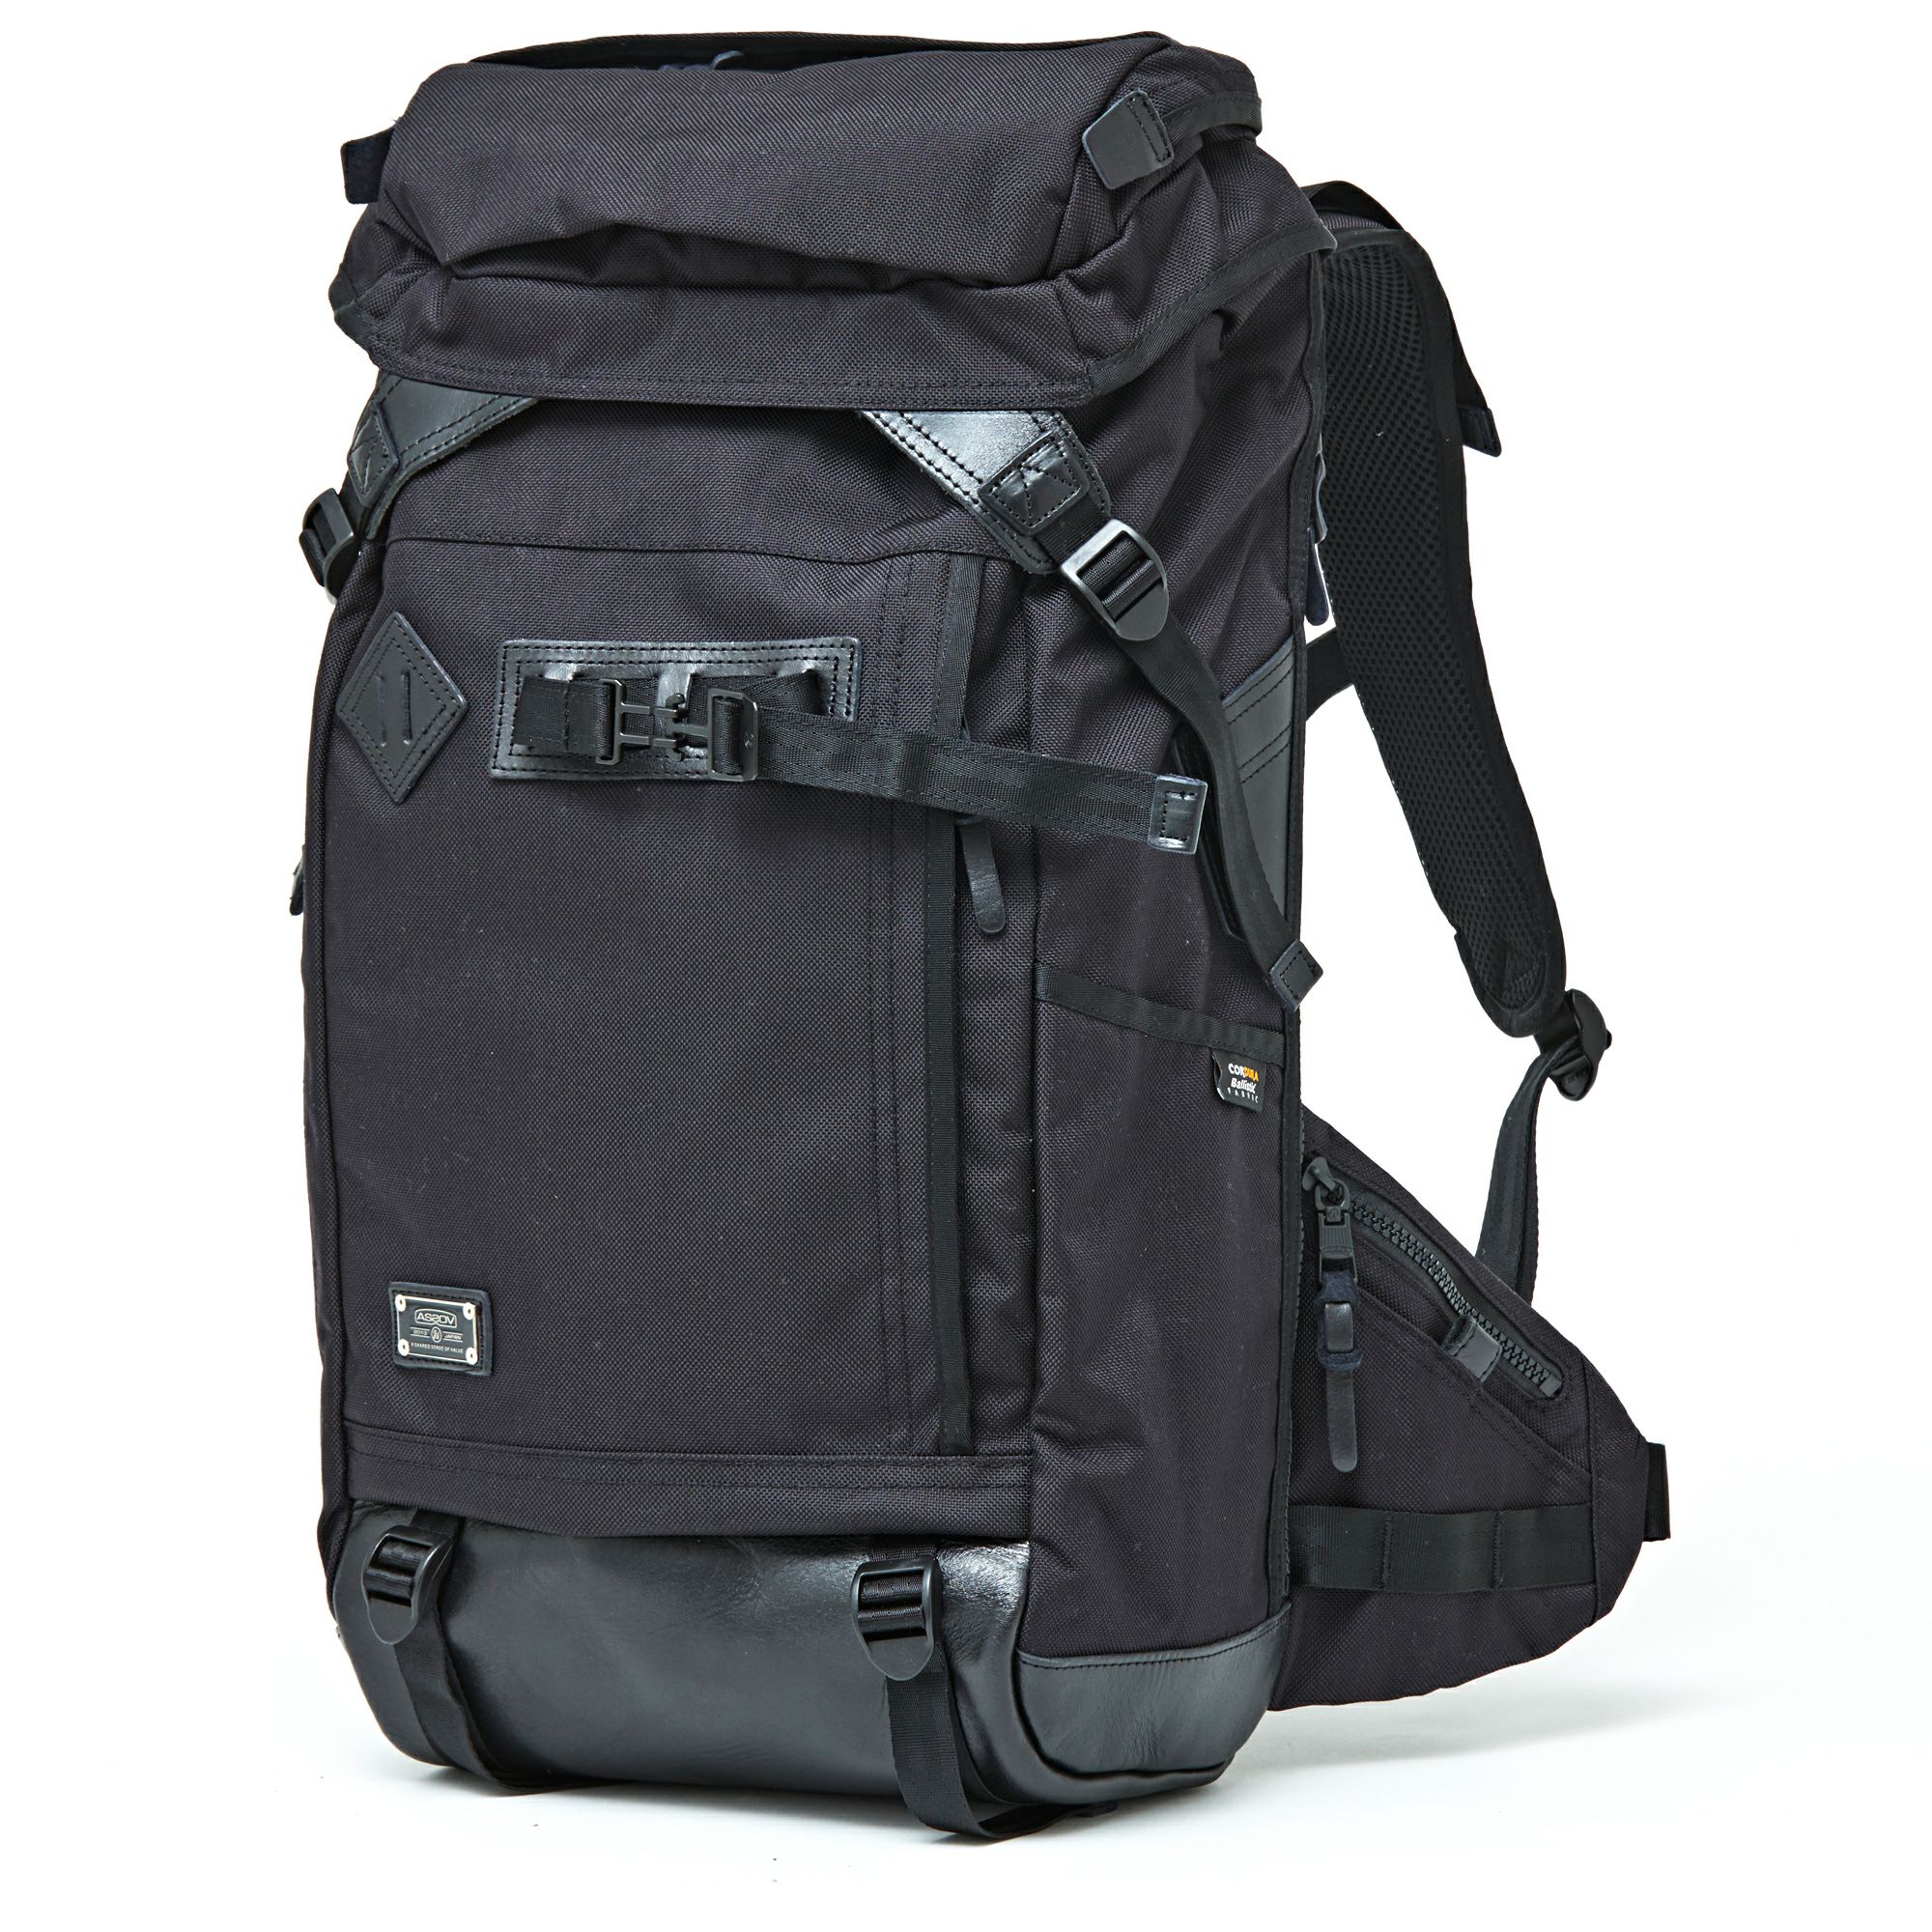 AS2OV (アッソブ) , EXCLUSIVE BALLISTIC NYLON BACK PACK / バックパック